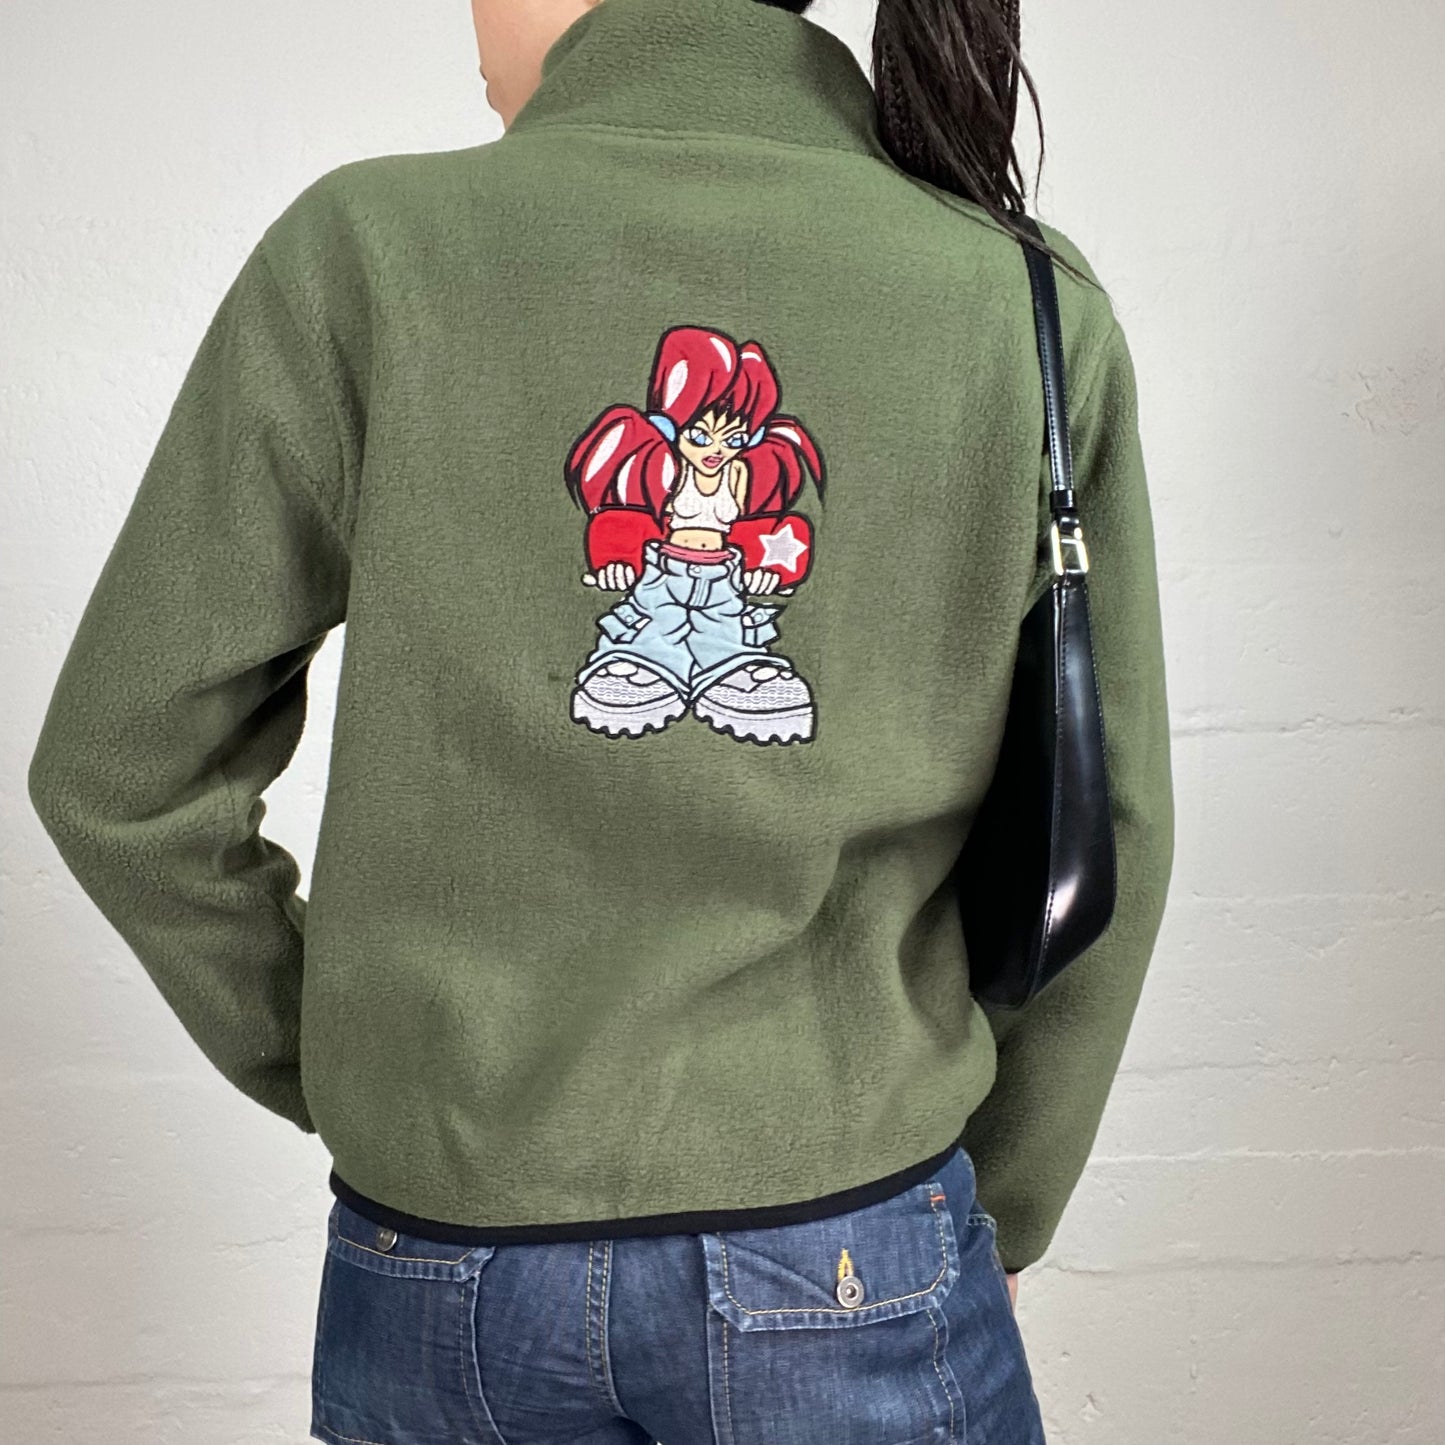 Vintage 90’s Skater Girl Feezy Khaki Green Zip Up Pullover Style Jacket with Back Cartoon Embroidery Detail (L)